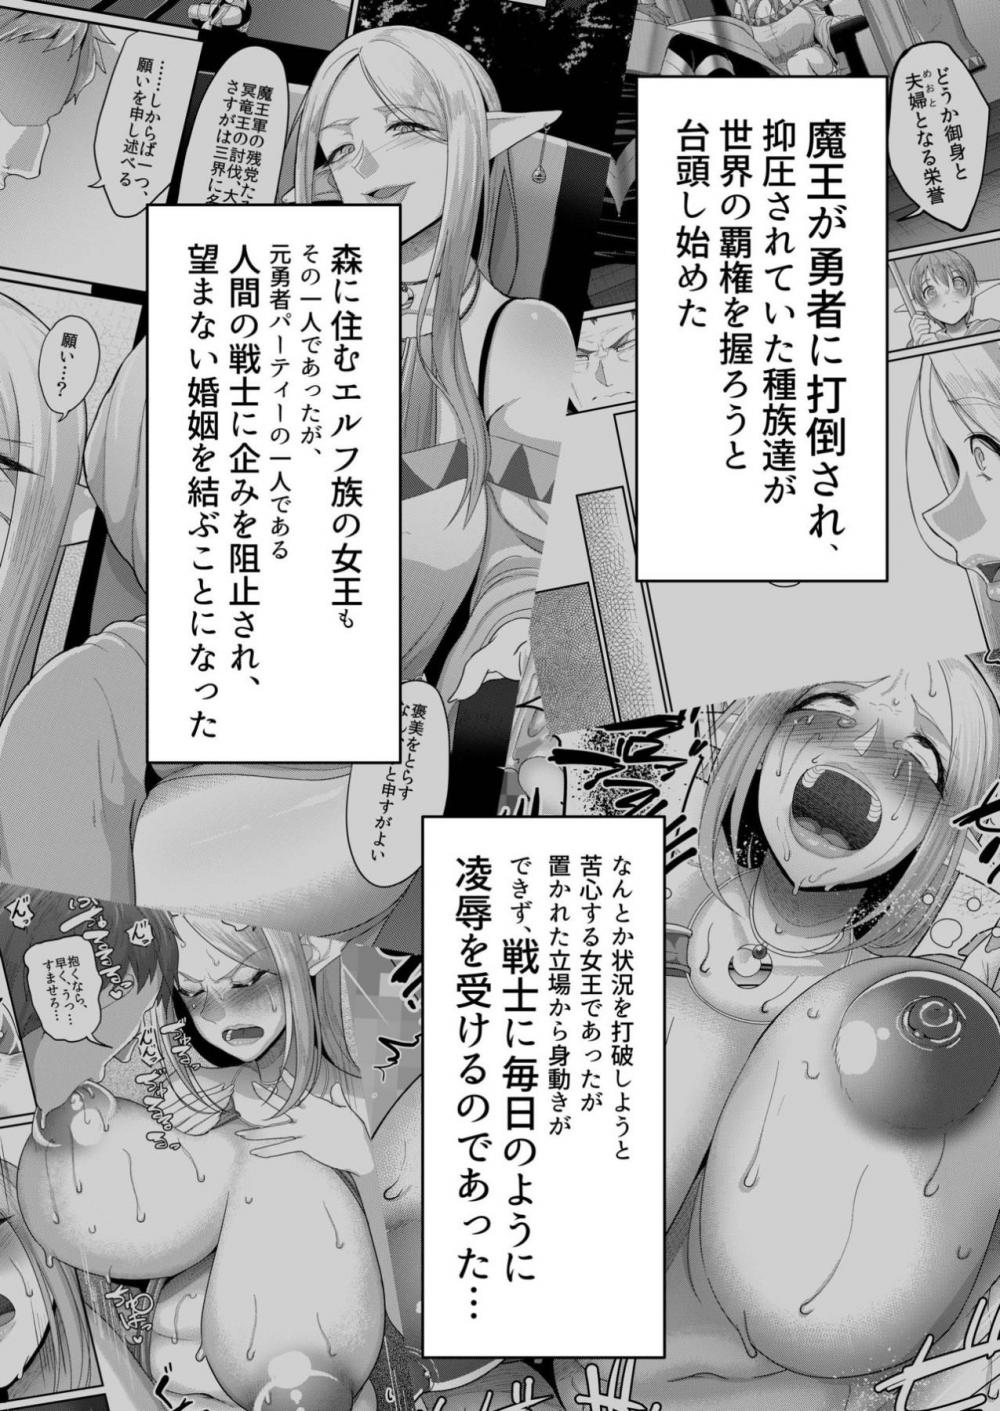 Hentai Manga Comic-Force Married With A Haughty Elf!!-Chapter 2-2